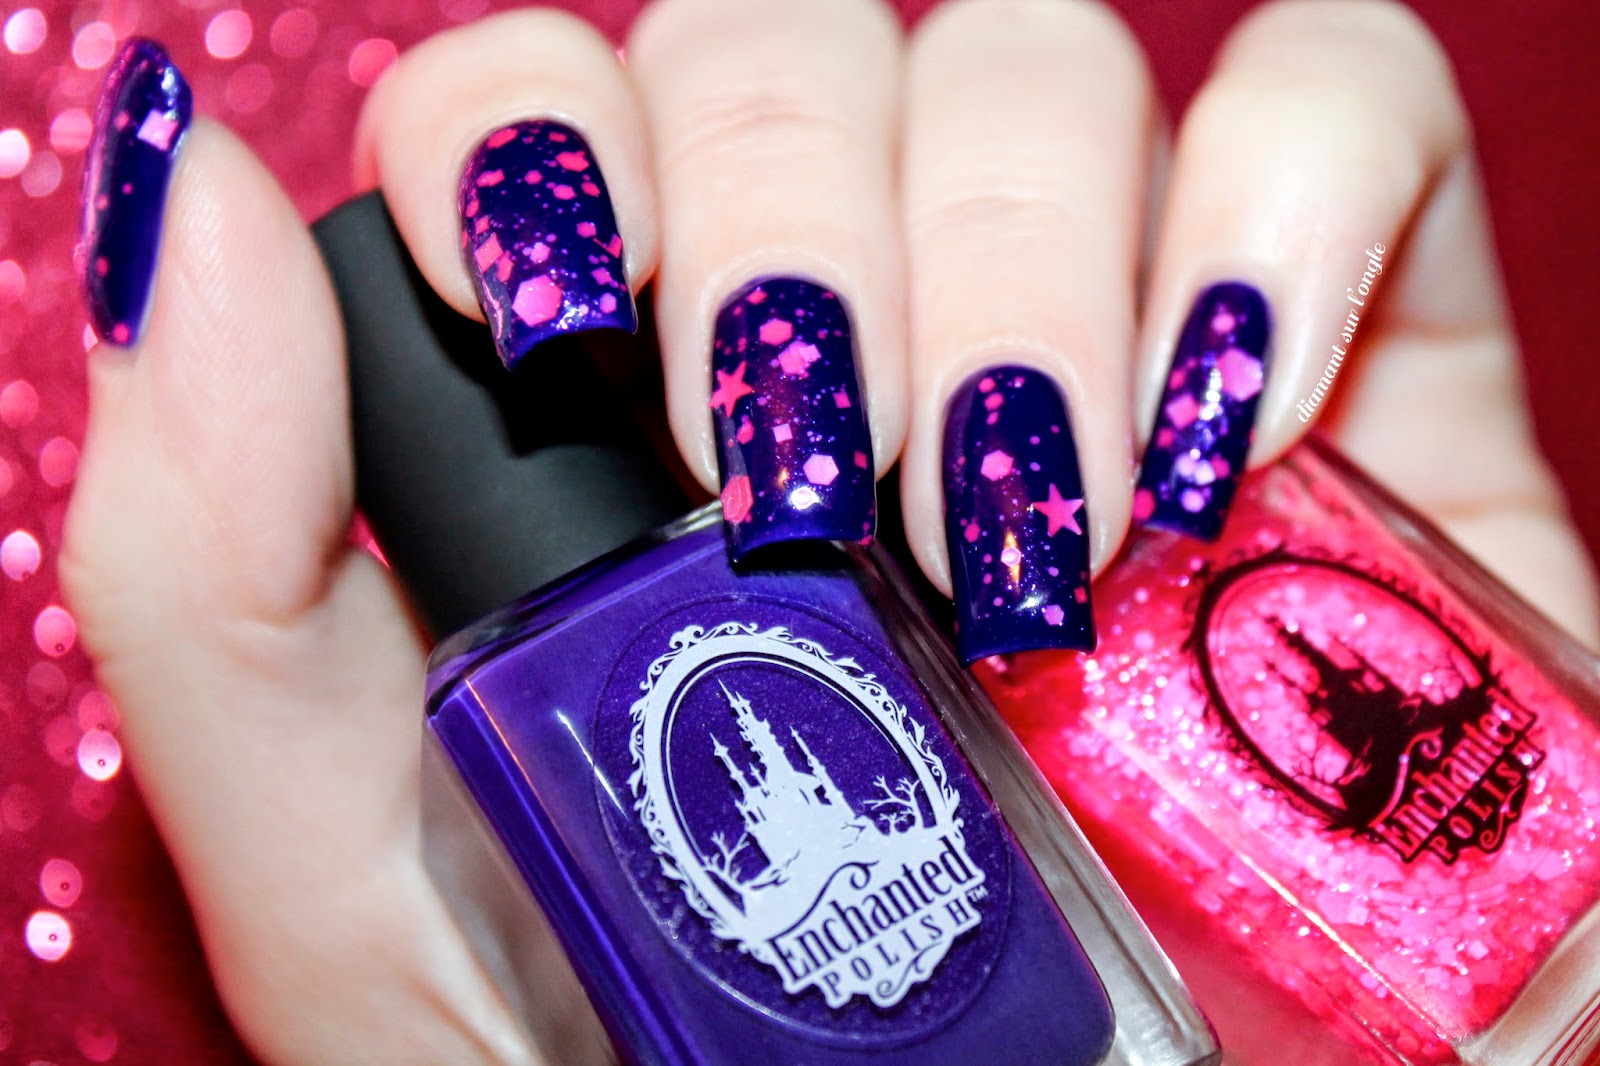 Regal and Life in Plastic, it's Fantastic from Enchanted Polish